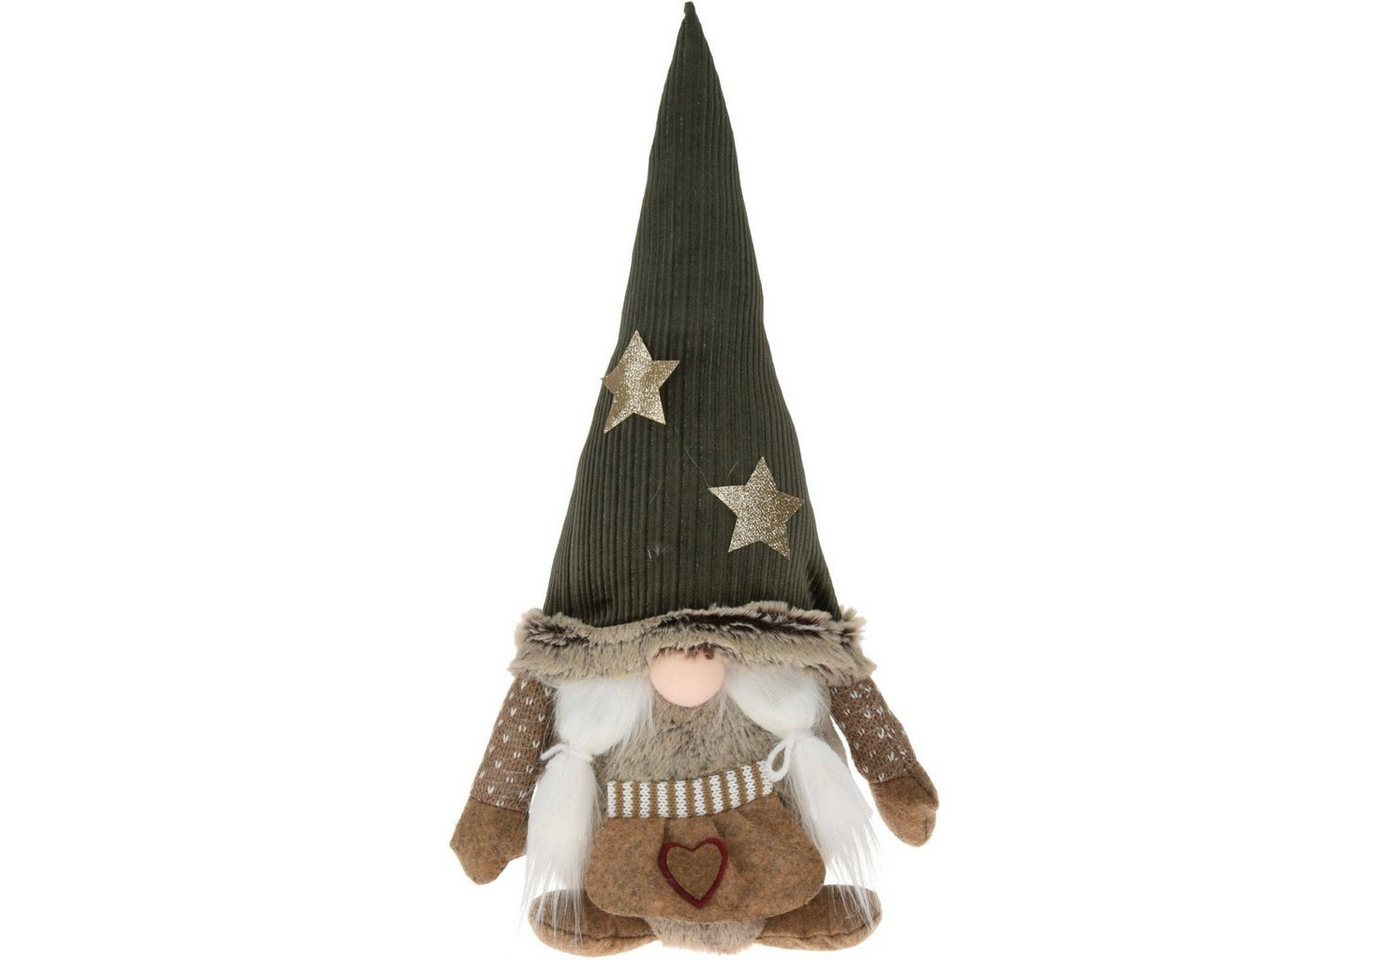 Home & styling collection Weihnachtsfigur Wichtelmännchen von Home & styling collection